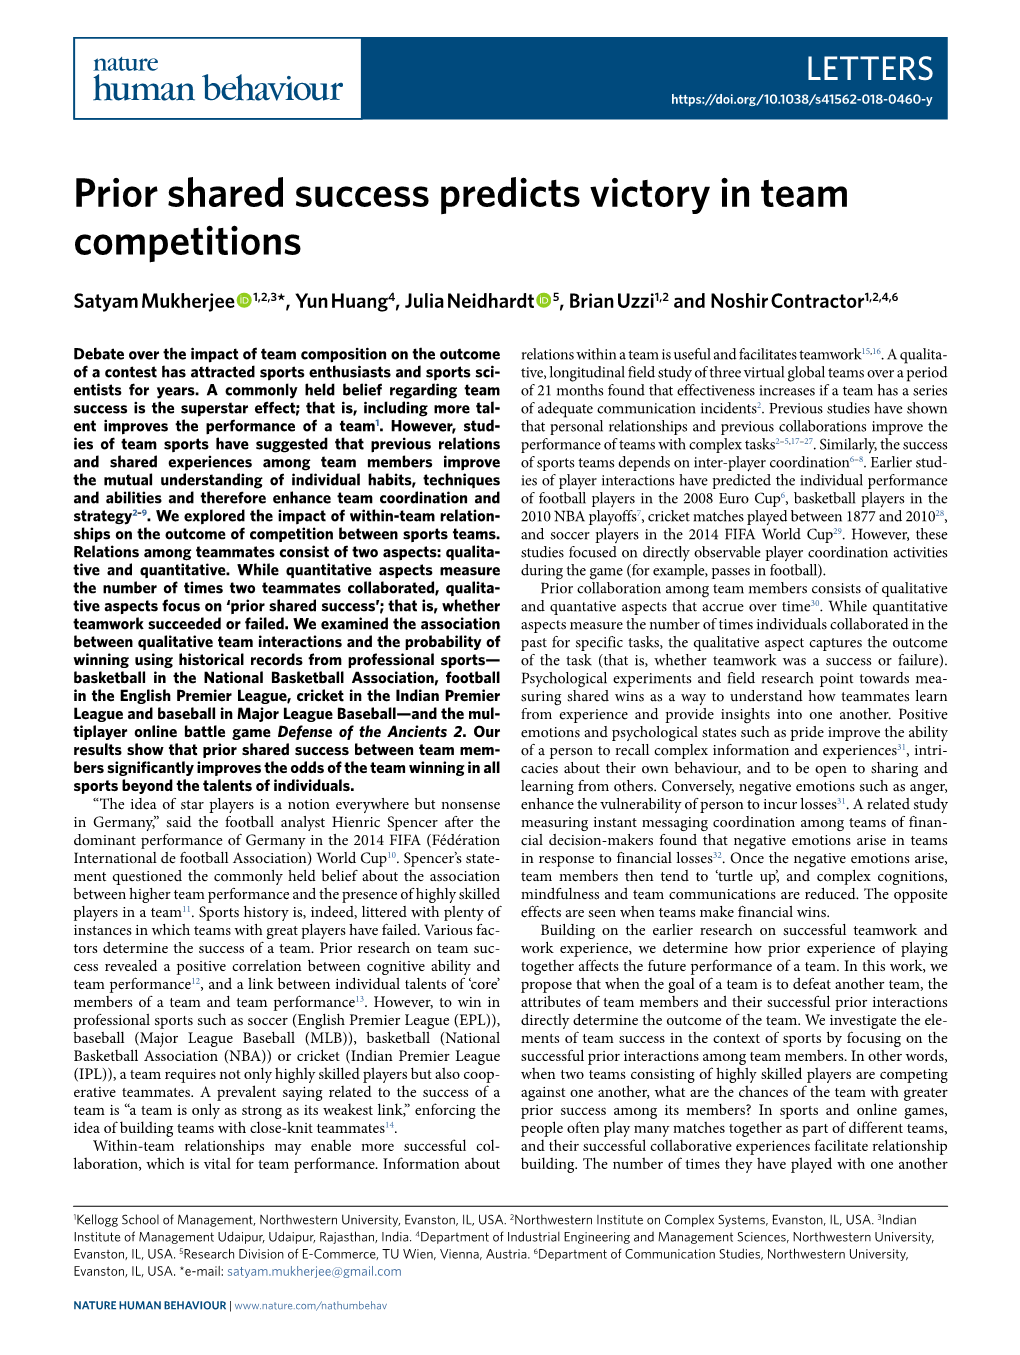 Prior Shared Success Predicts Victory in Team Competitions